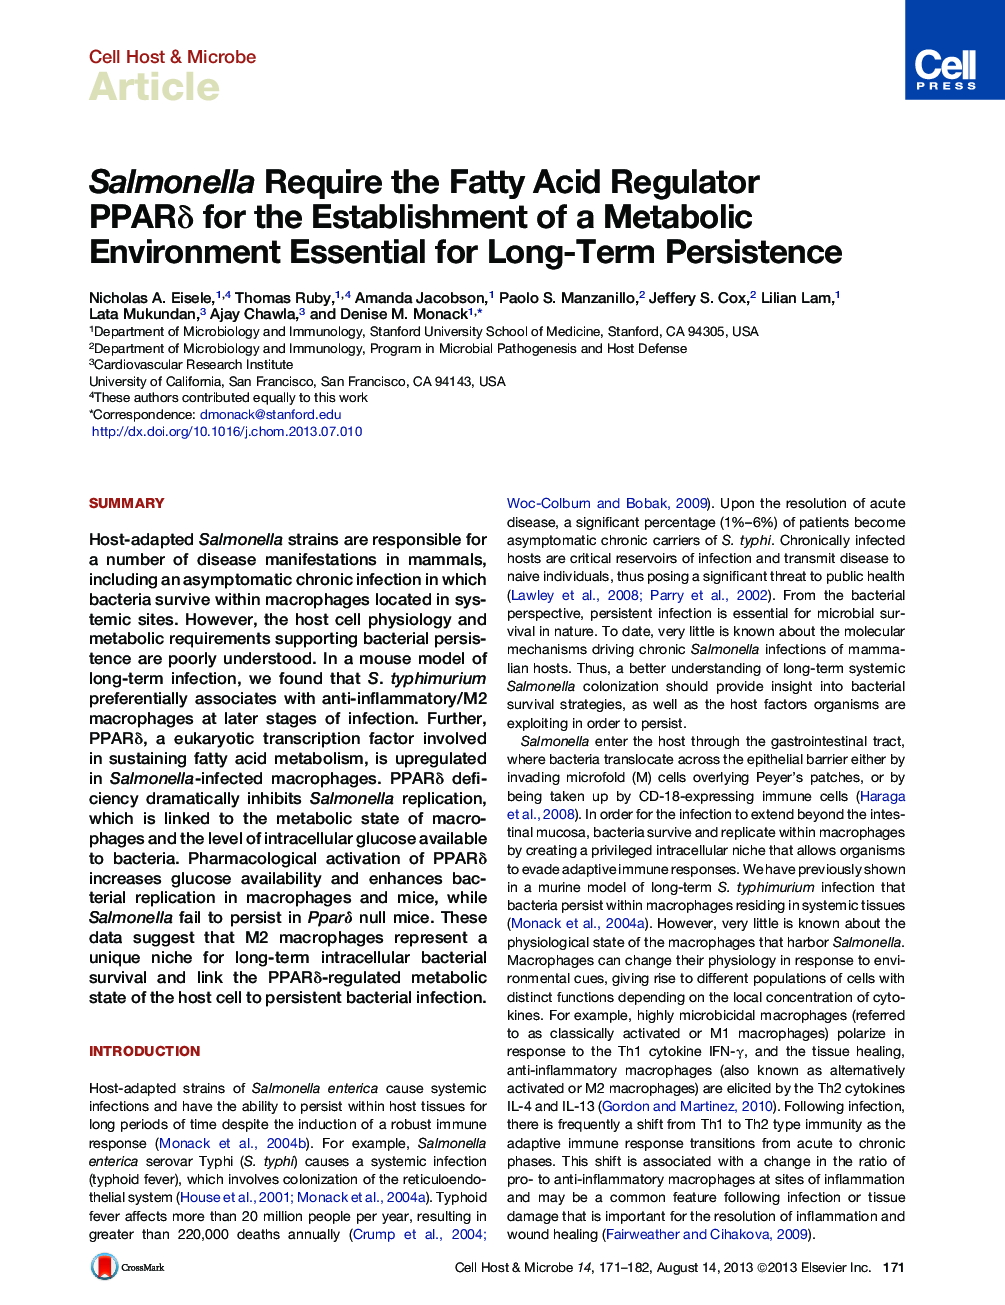 Salmonella Require the Fatty Acid Regulator PPARδ for the Establishment of a Metabolic Environment Essential for Long-Term Persistence